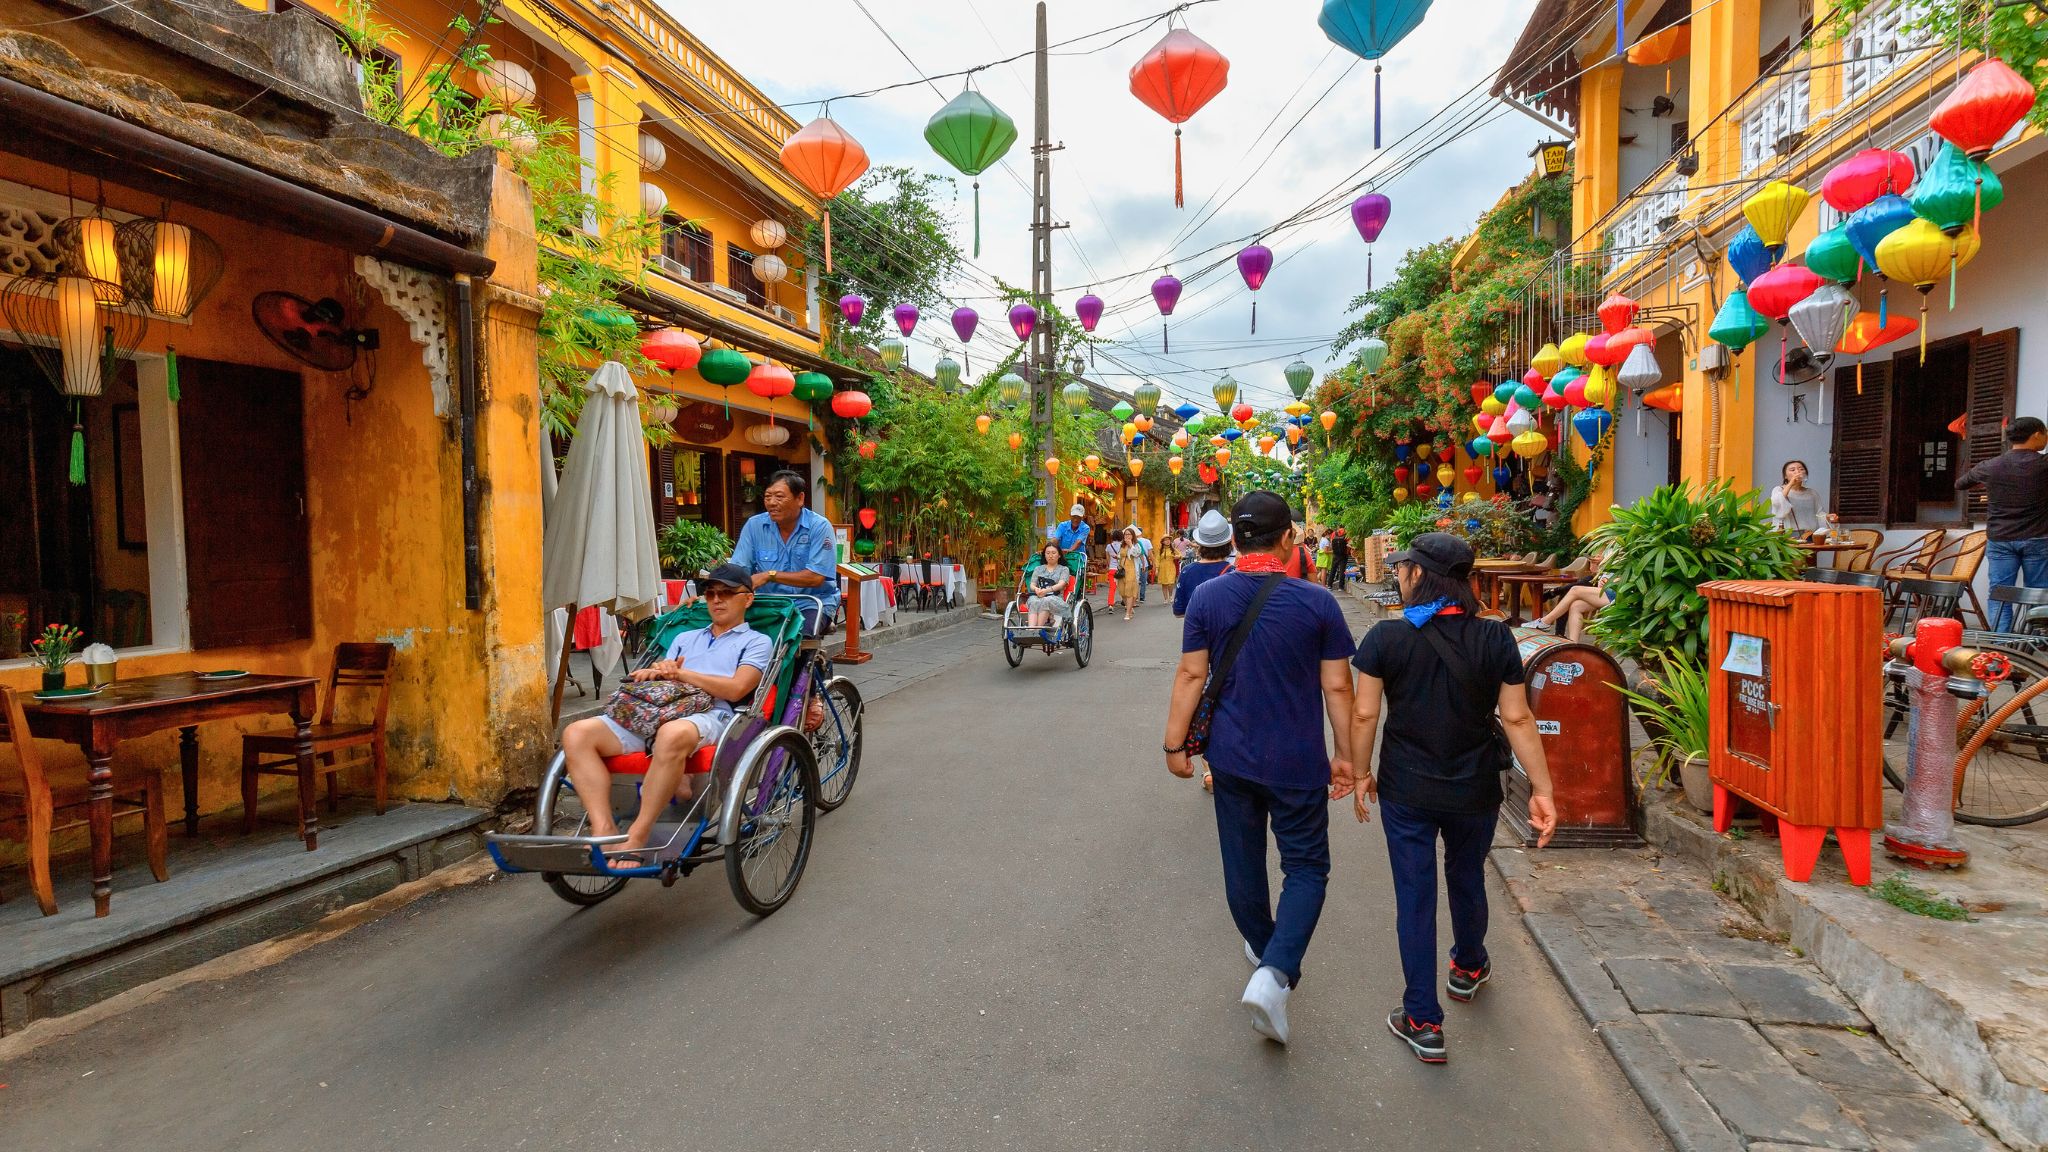 Day 4 Wander Around Hoi An Ancient Town